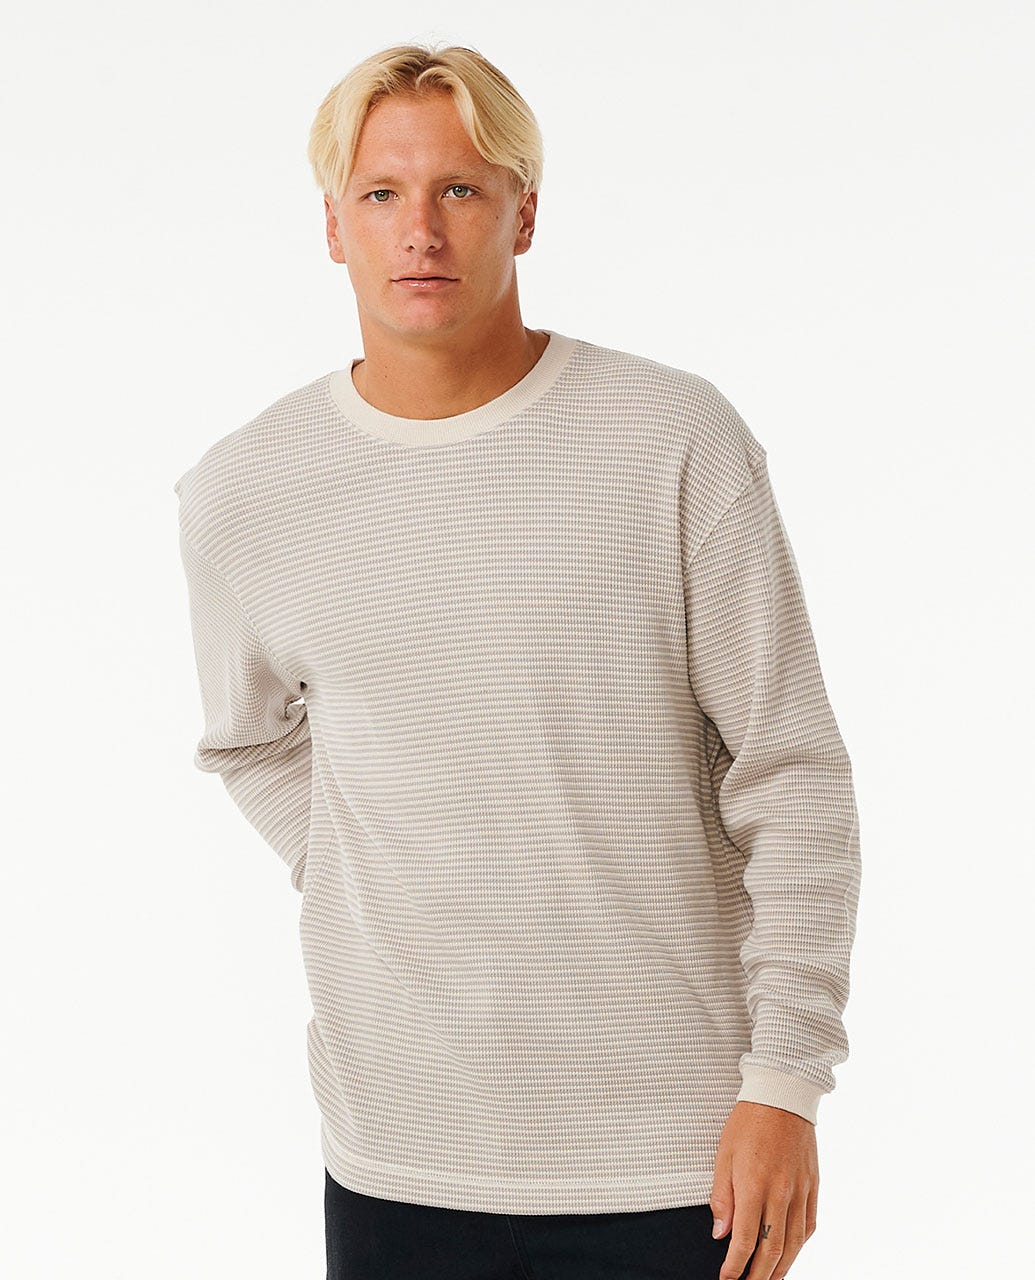 Rip Curl Quality Surf Products Long Sleeve Tee Vintage White